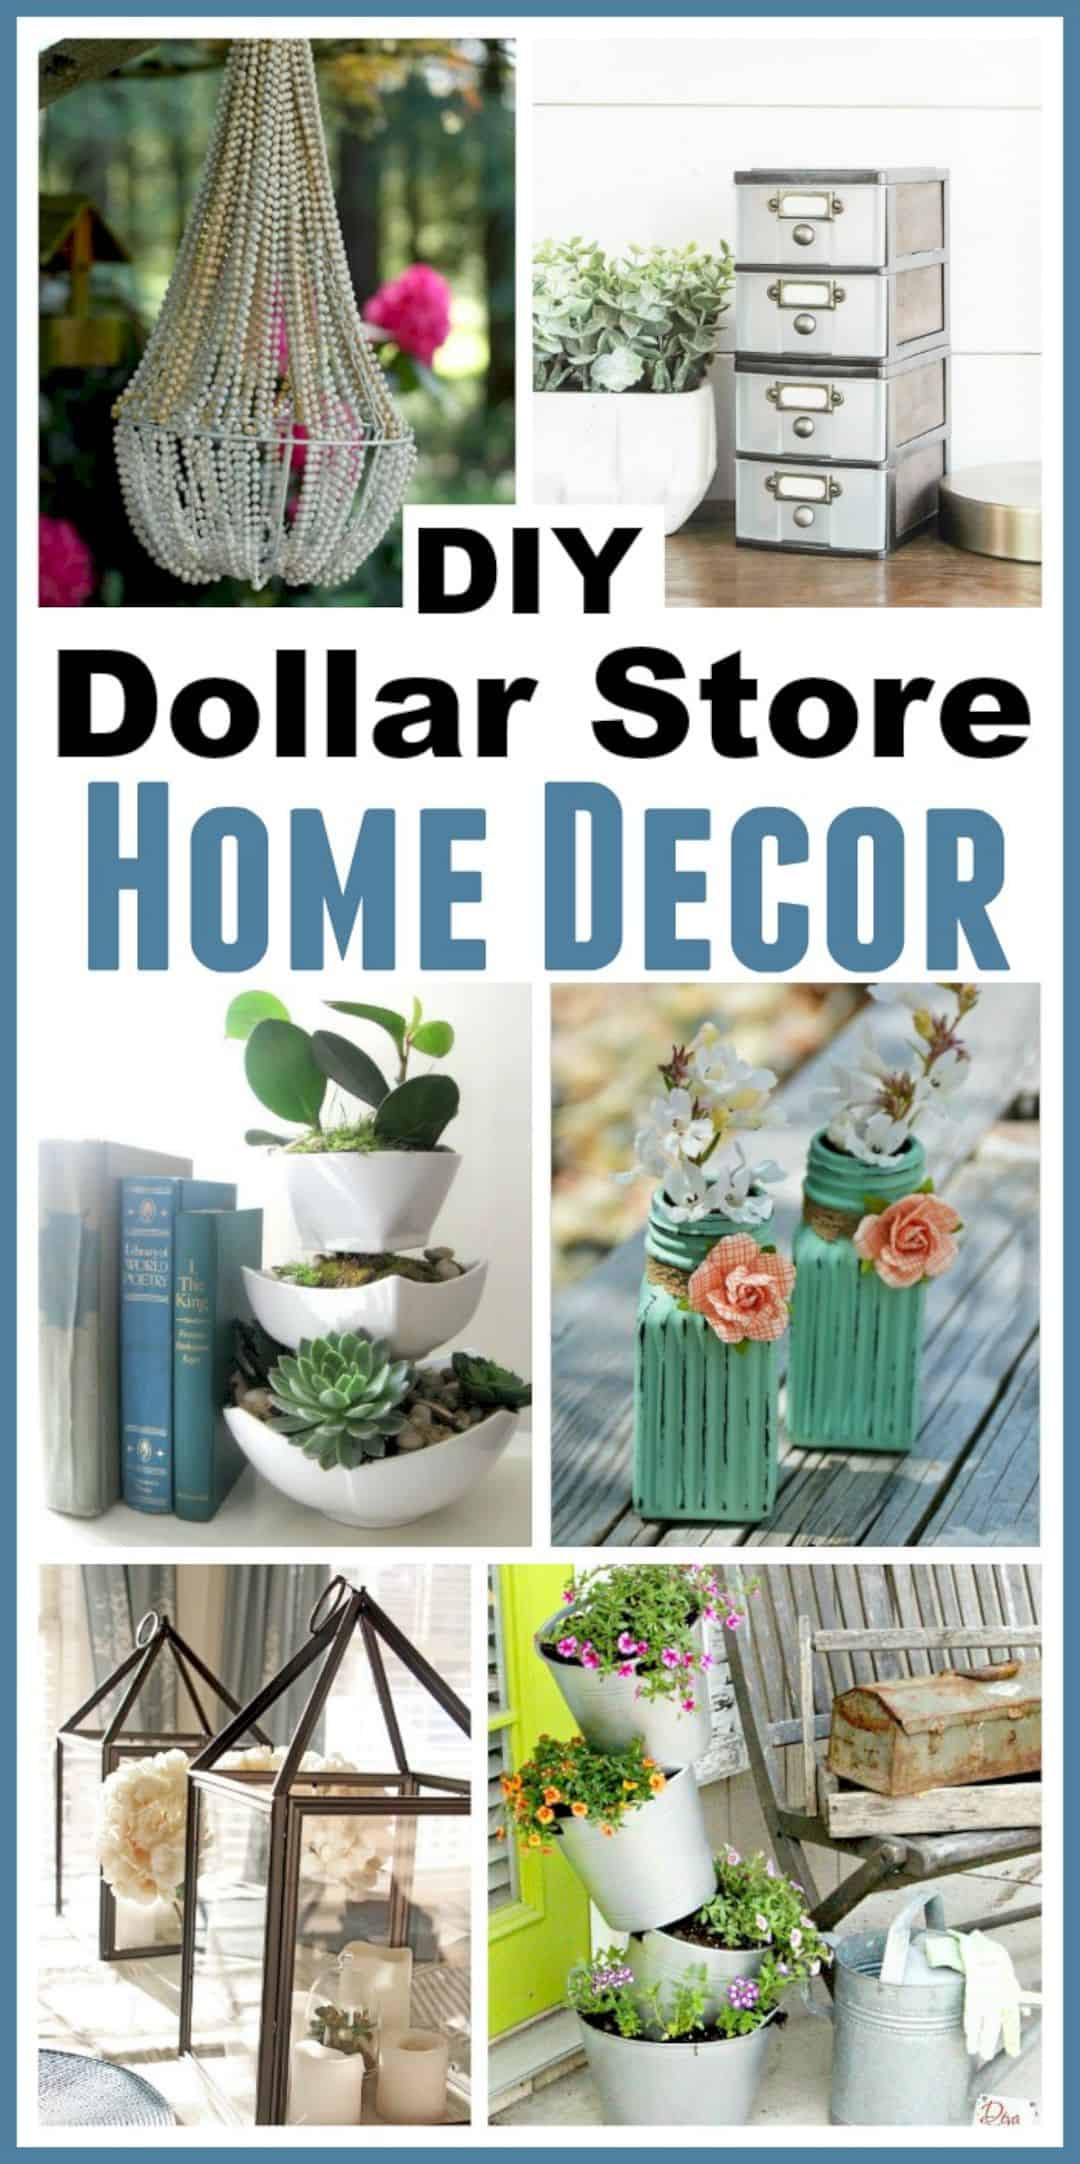 DIY Decorating Projects
 These 12 Bud Friendly DIY Home Decor Projects Are Worth